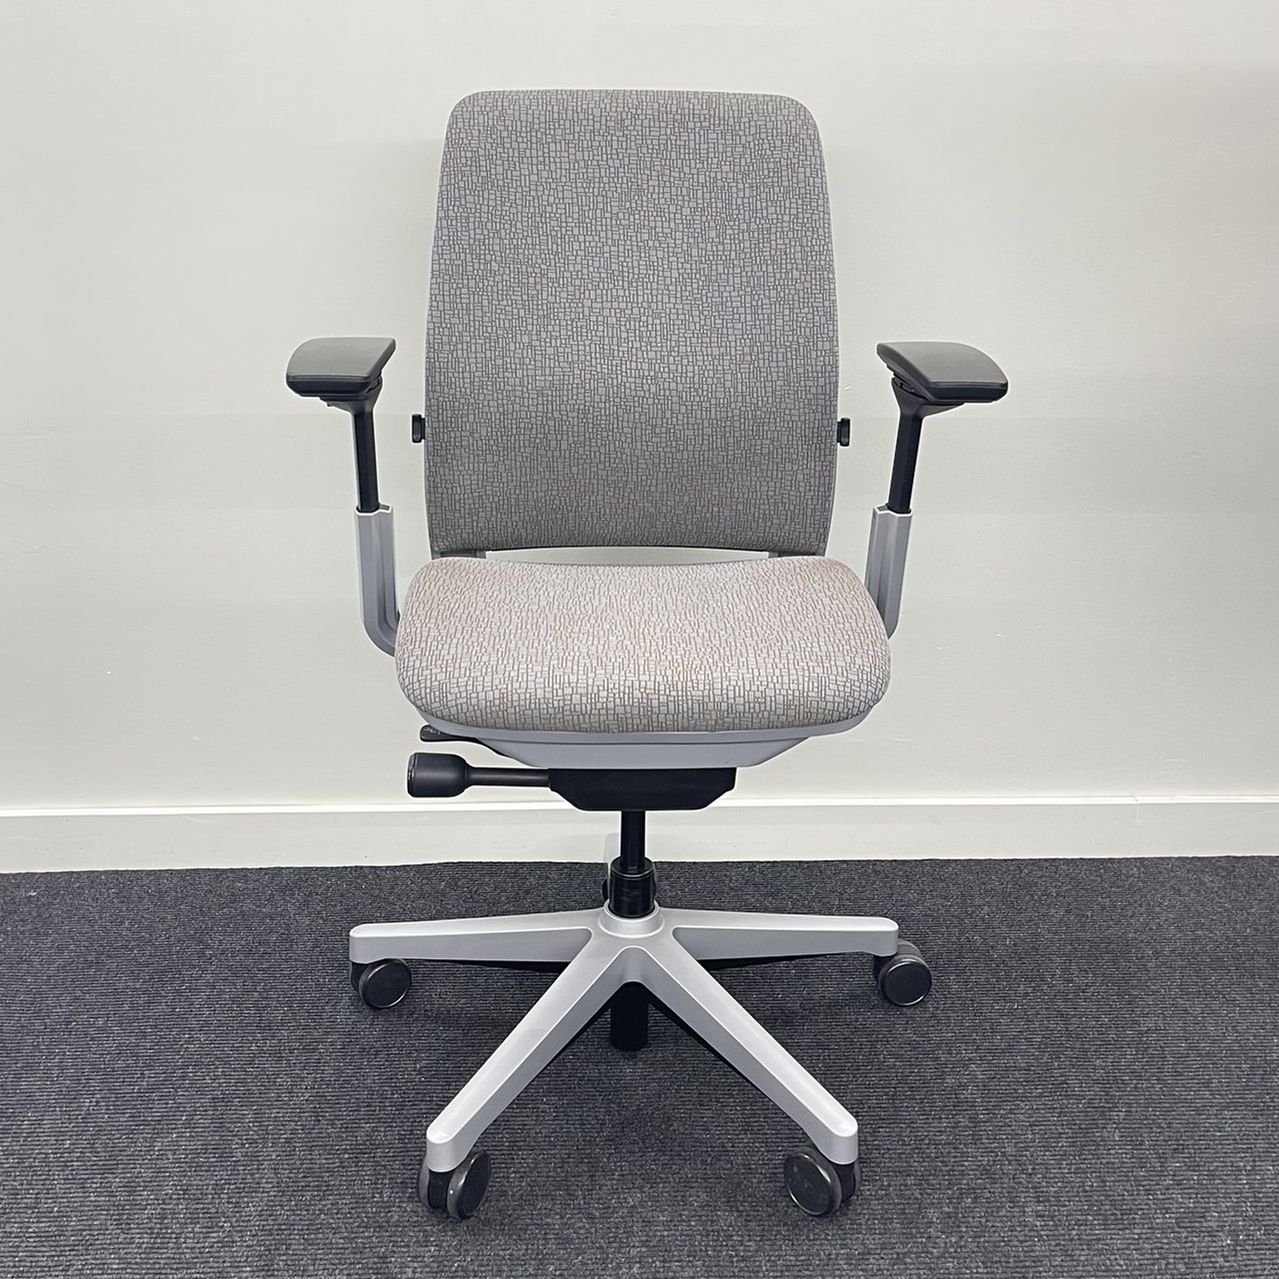 LIKE NEW STEELCASE AMIA CHAIR FULLY LOADED WITH LUMBAR SUPPORT!  